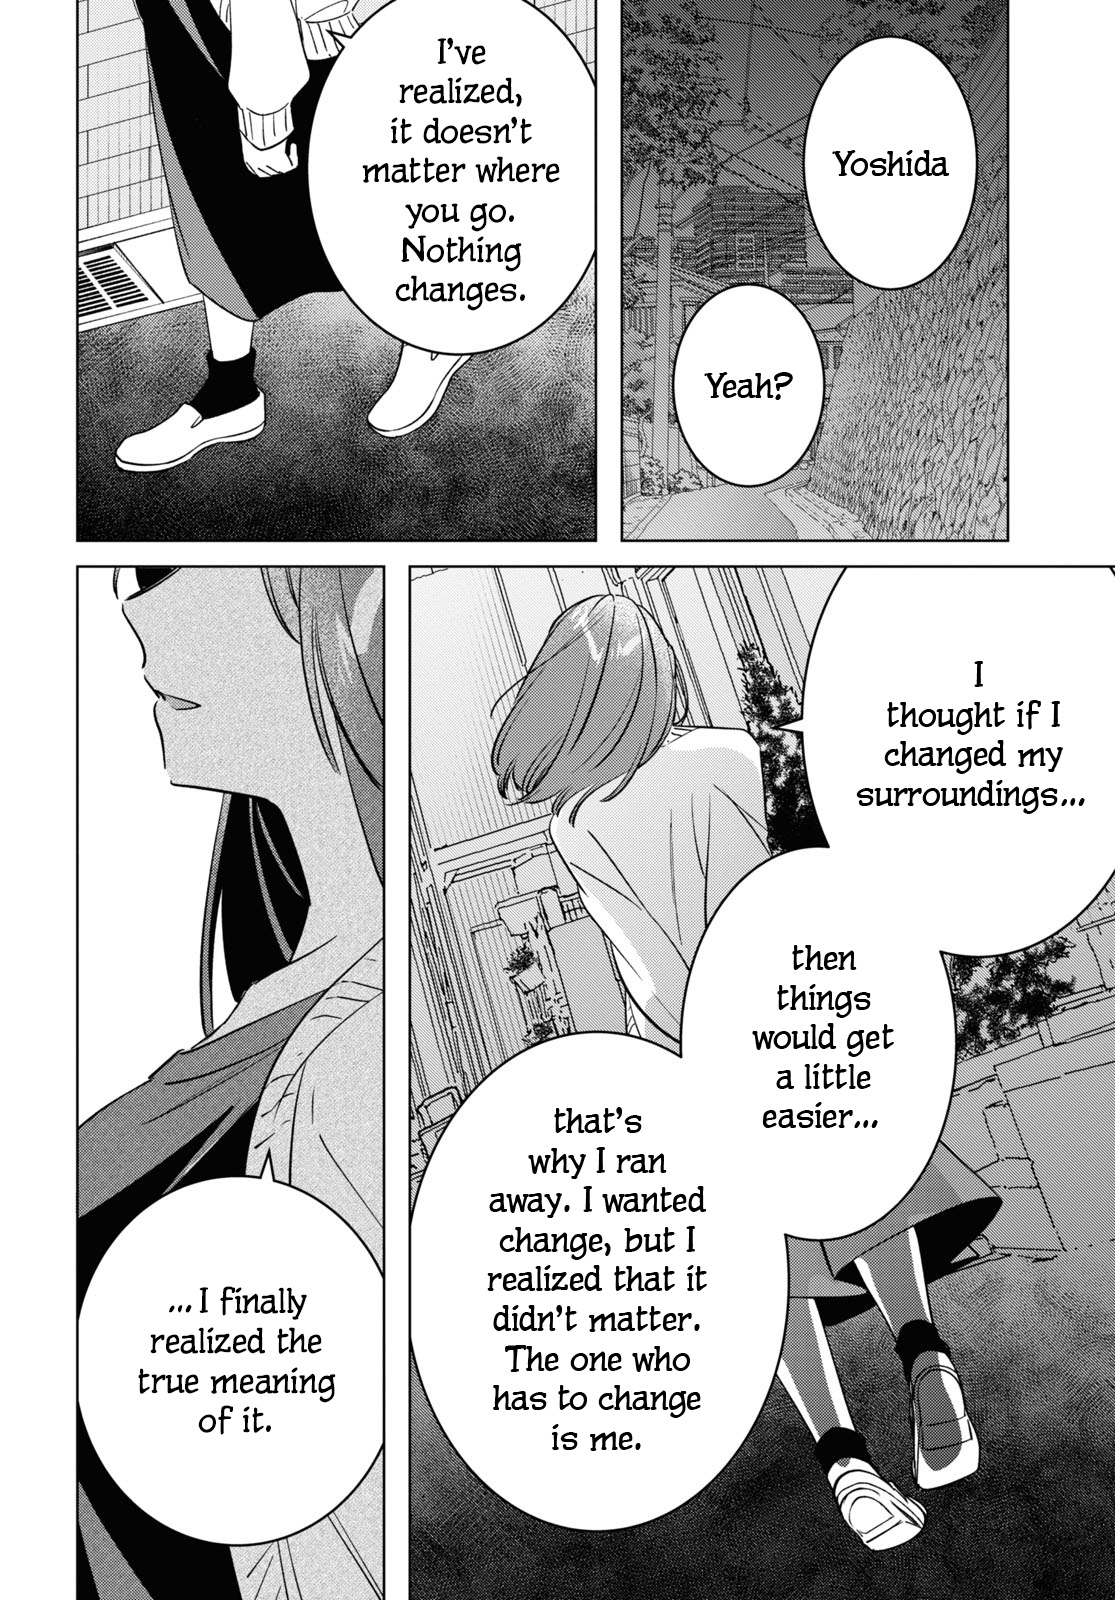 I Shaved. Then I Brought A High School Girl Home. Vol.11 Chapter 54